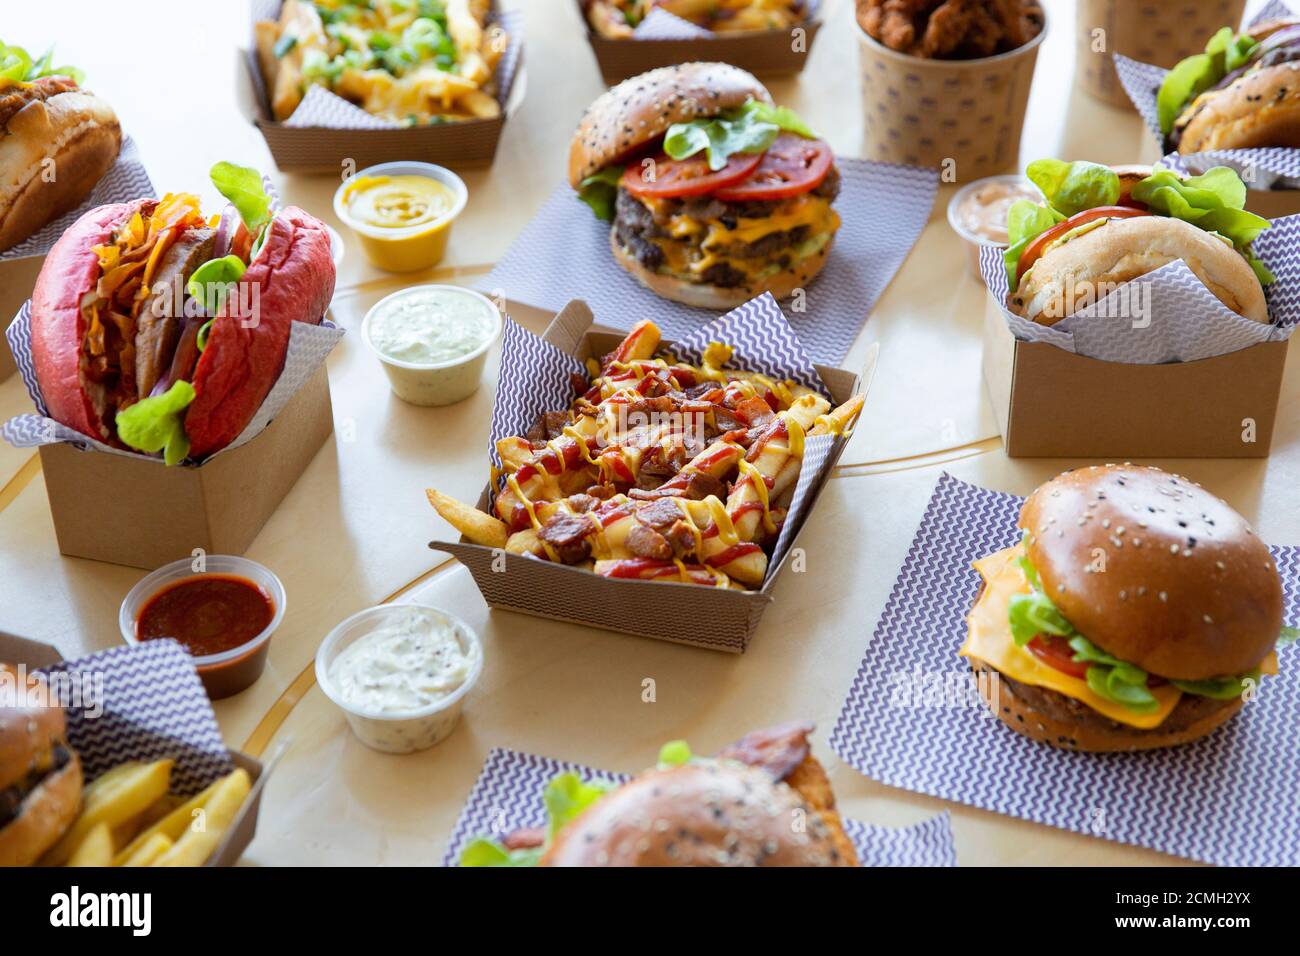 Takeaway burger restaurant layout with loaded fries placed with sauces and menu item selection. Stock Photo